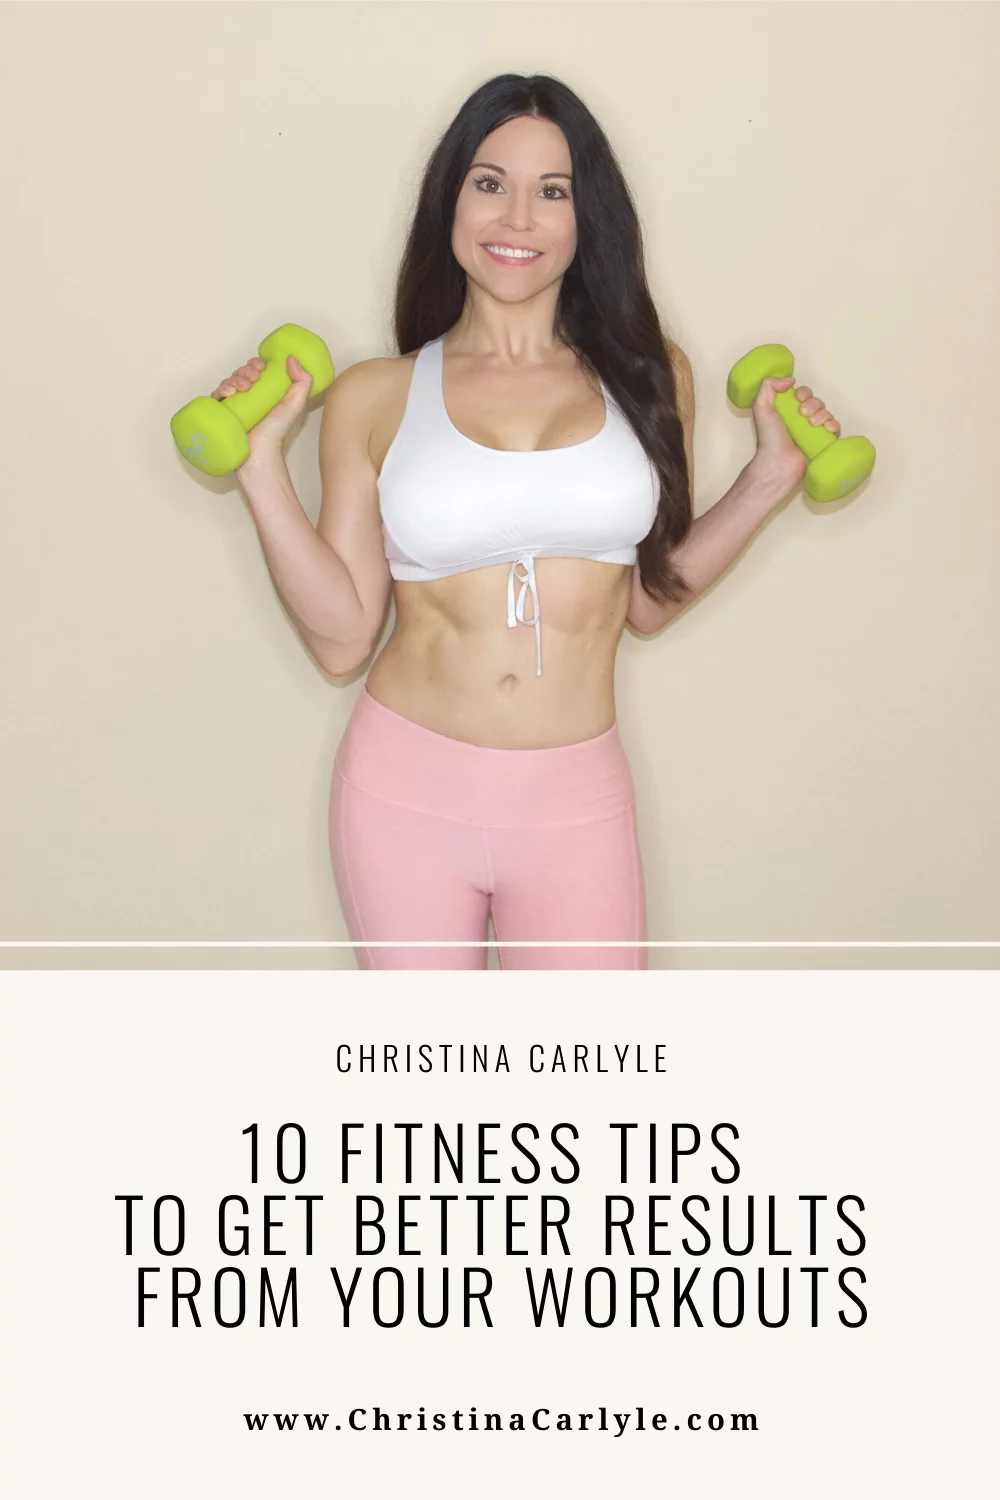 10 Fitness Tips for Better Results from your Workouts